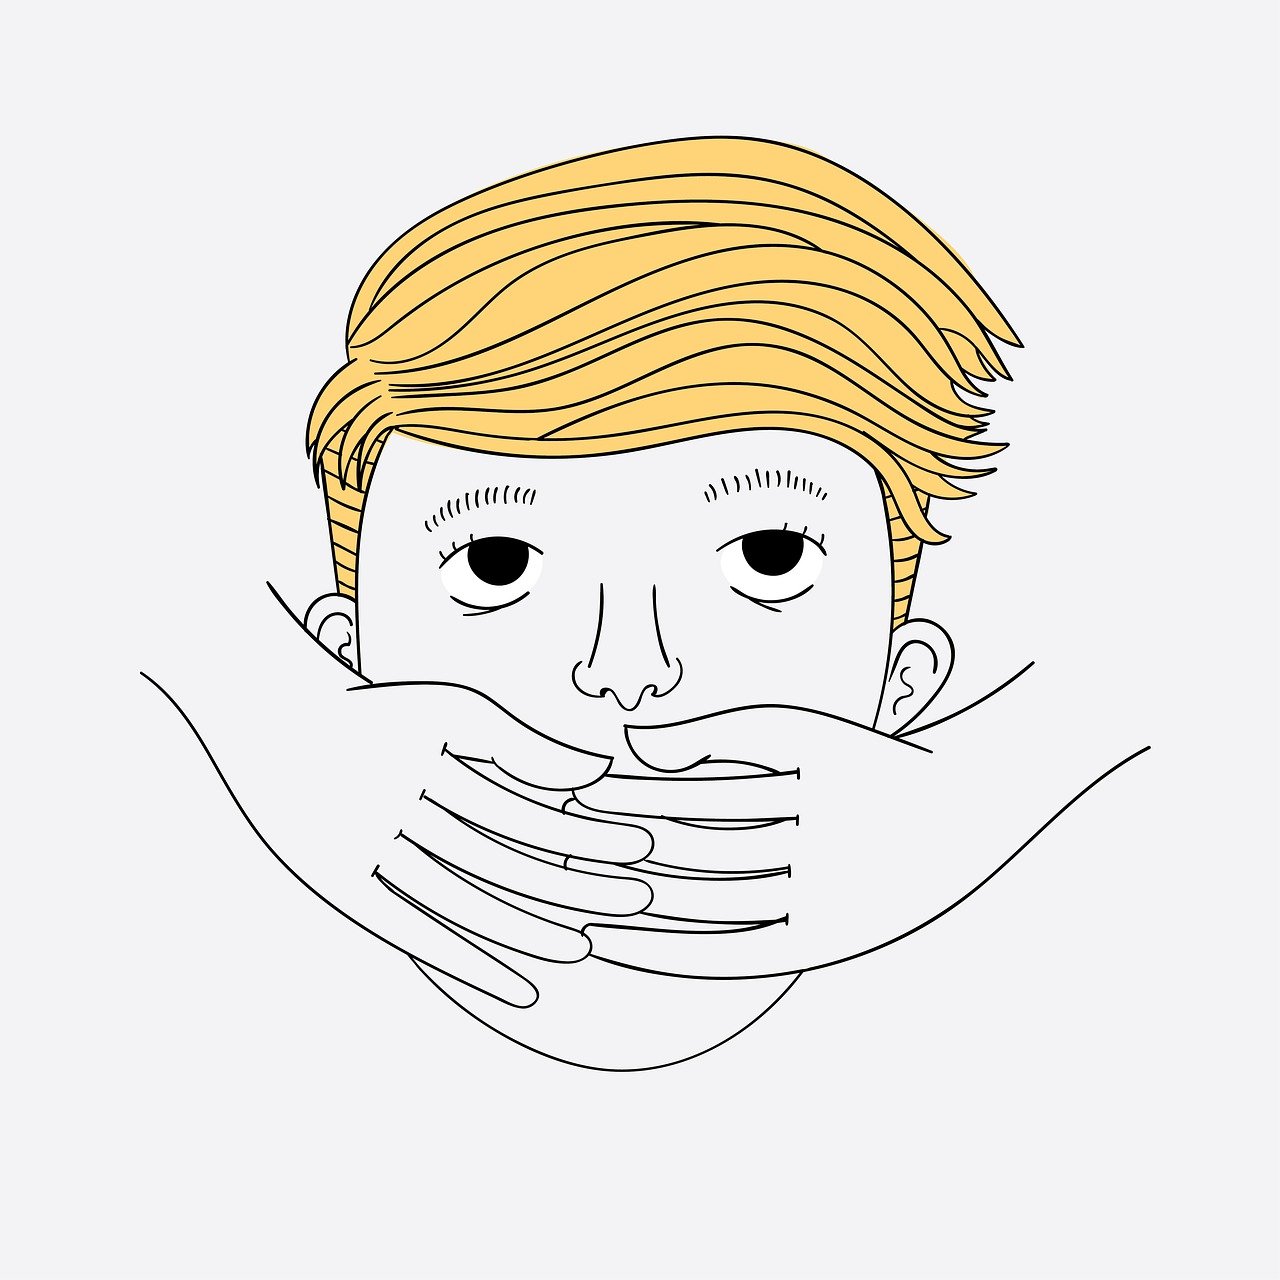 a drawing of a man covering his face with his hands, vector art, shutterstock, blond boy, portrait of trump, worksafe. illustration, clean lineart and flat color